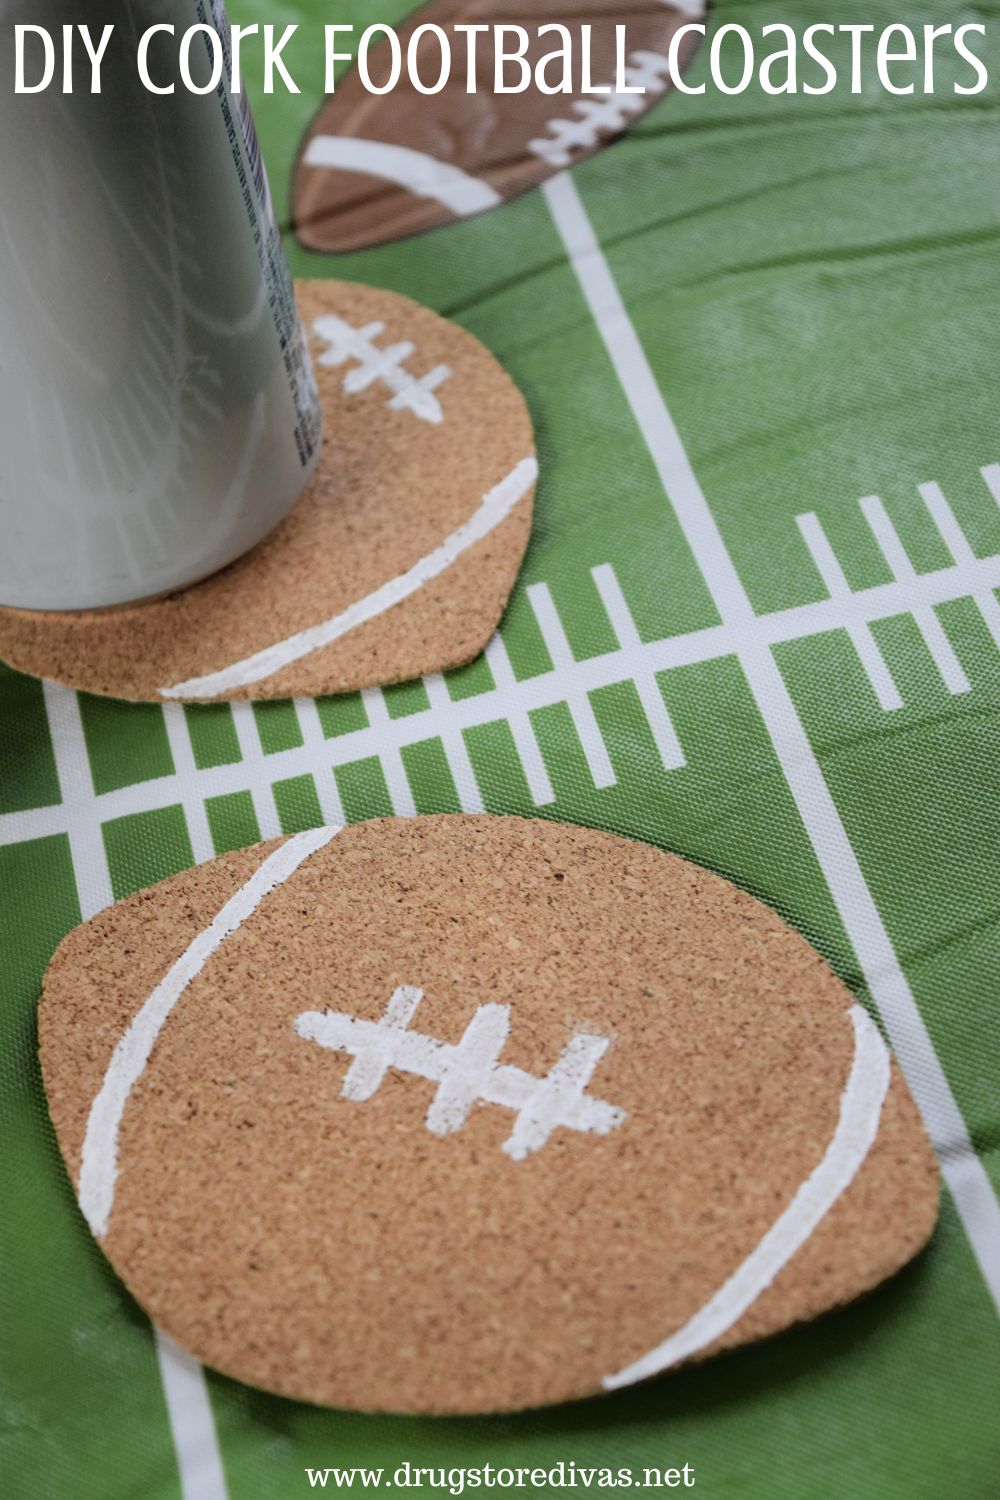 A can on a football coaster next to a football coaster on a football field tablecloth with the words 